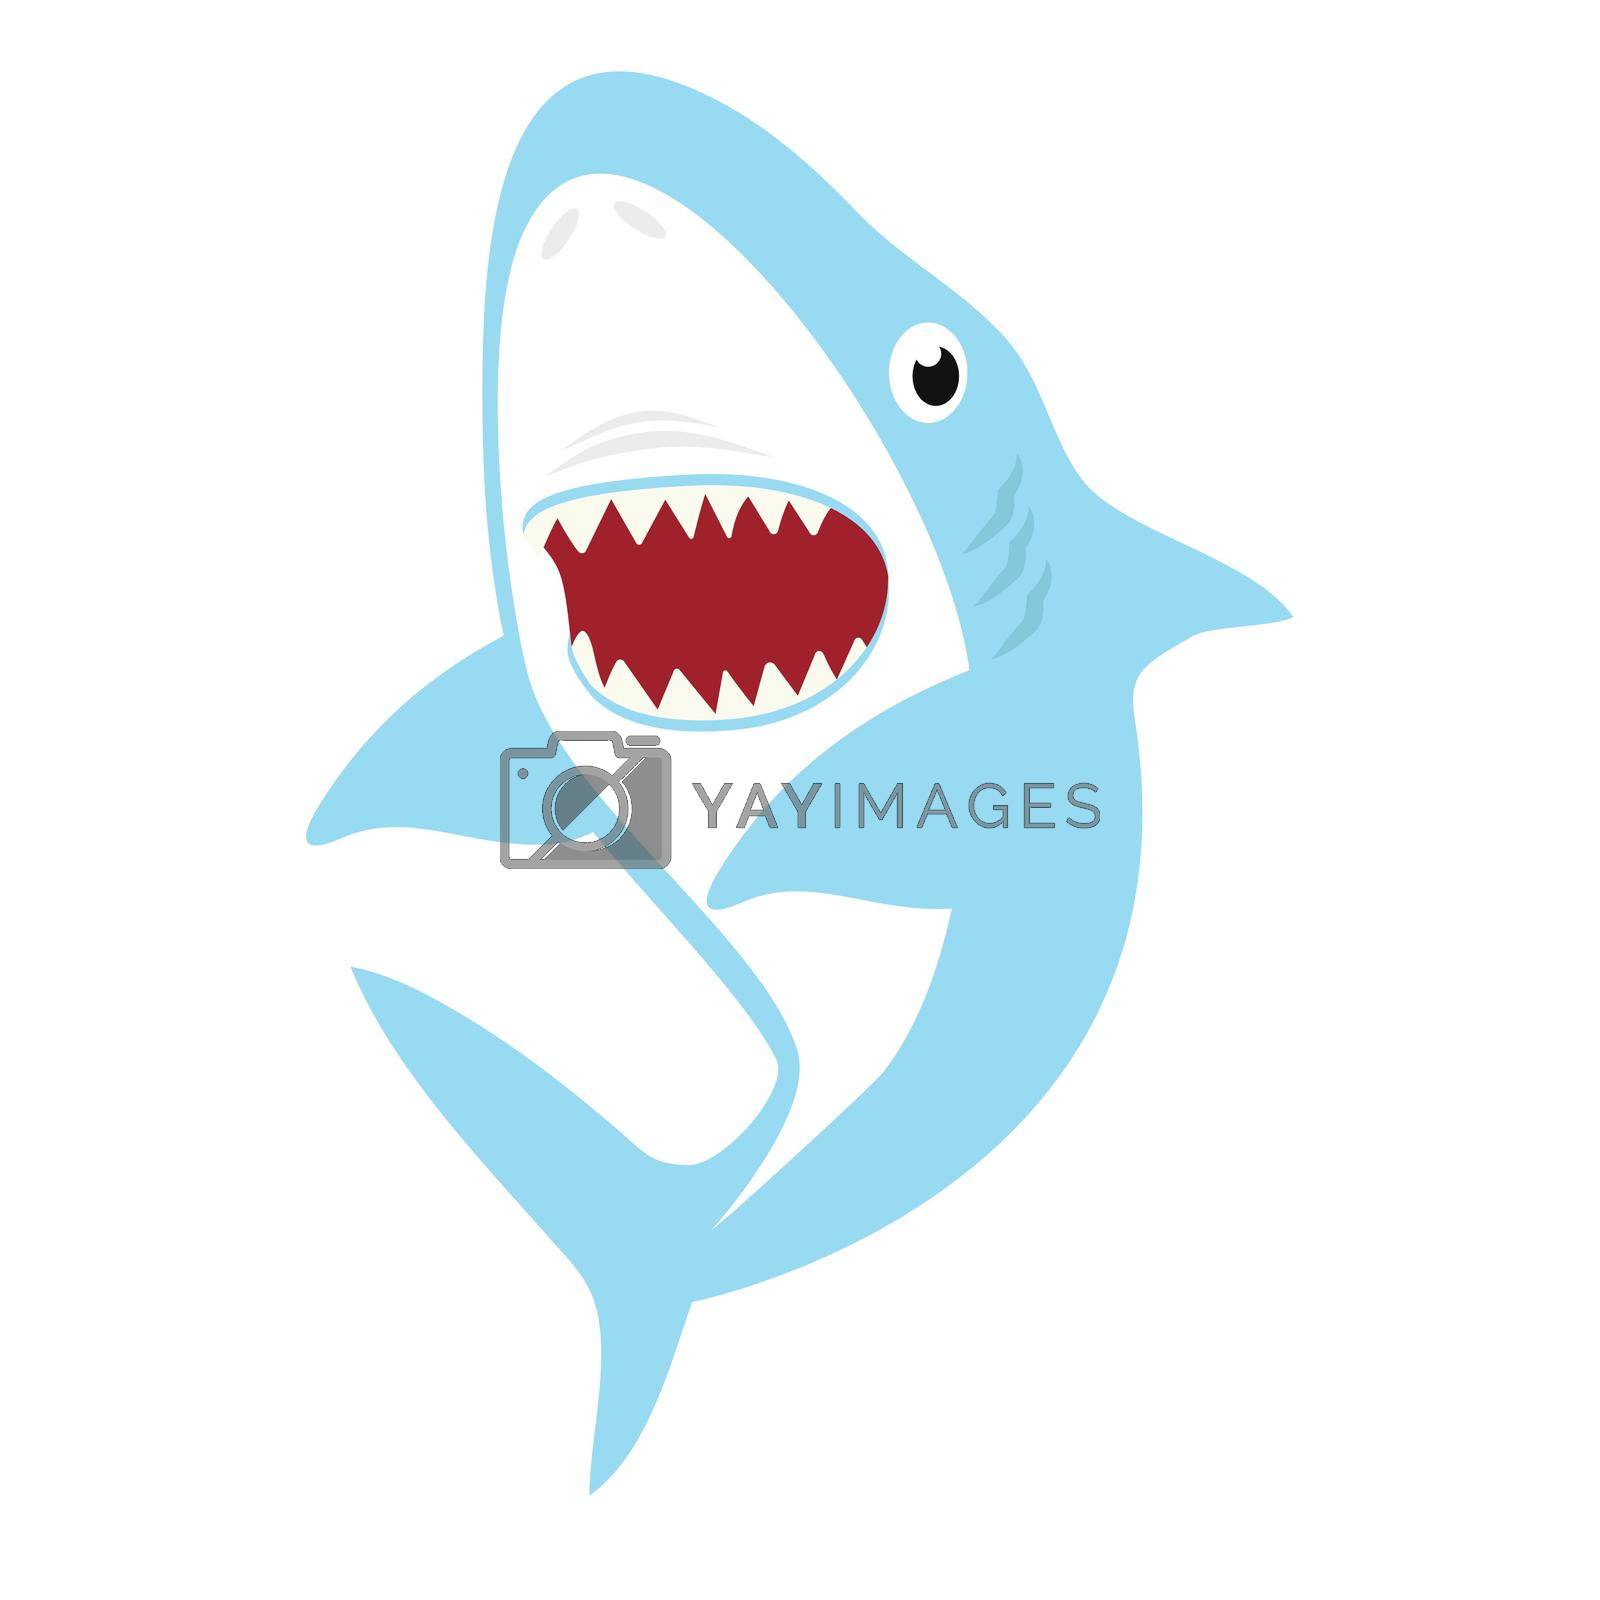 Royalty free image of Cute shark with open mouth cartoon  by focus_bell